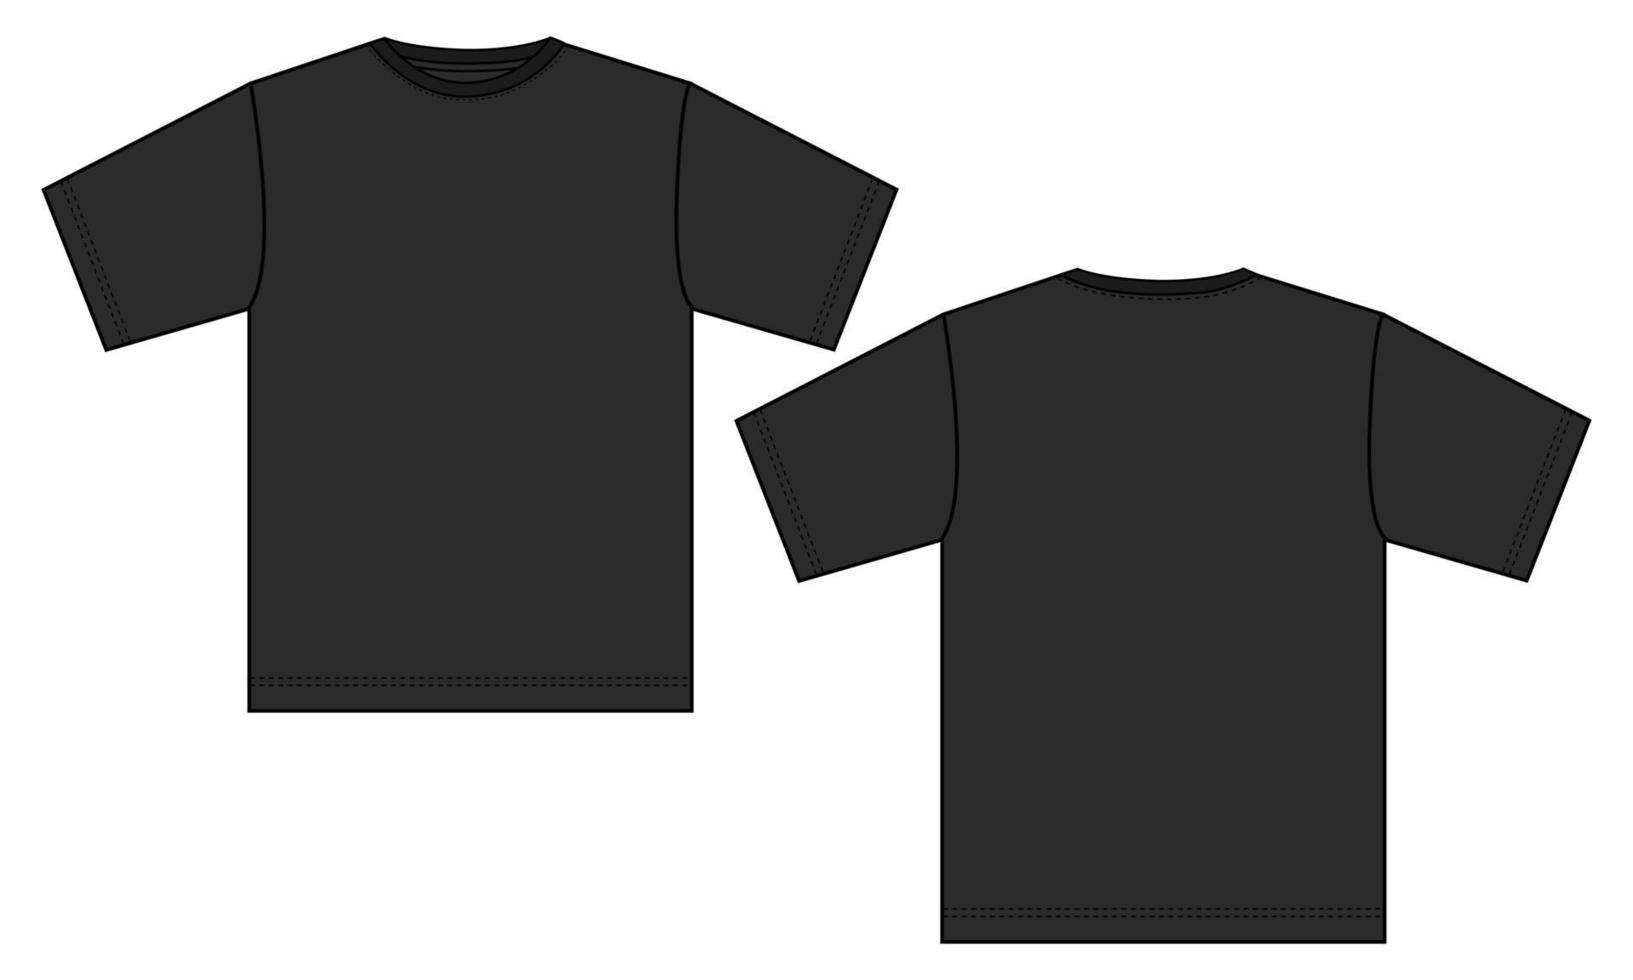 T-shirt technical fashion Flat  Sketch vector illustration Black Color Template Front And back views Isolated On white background.